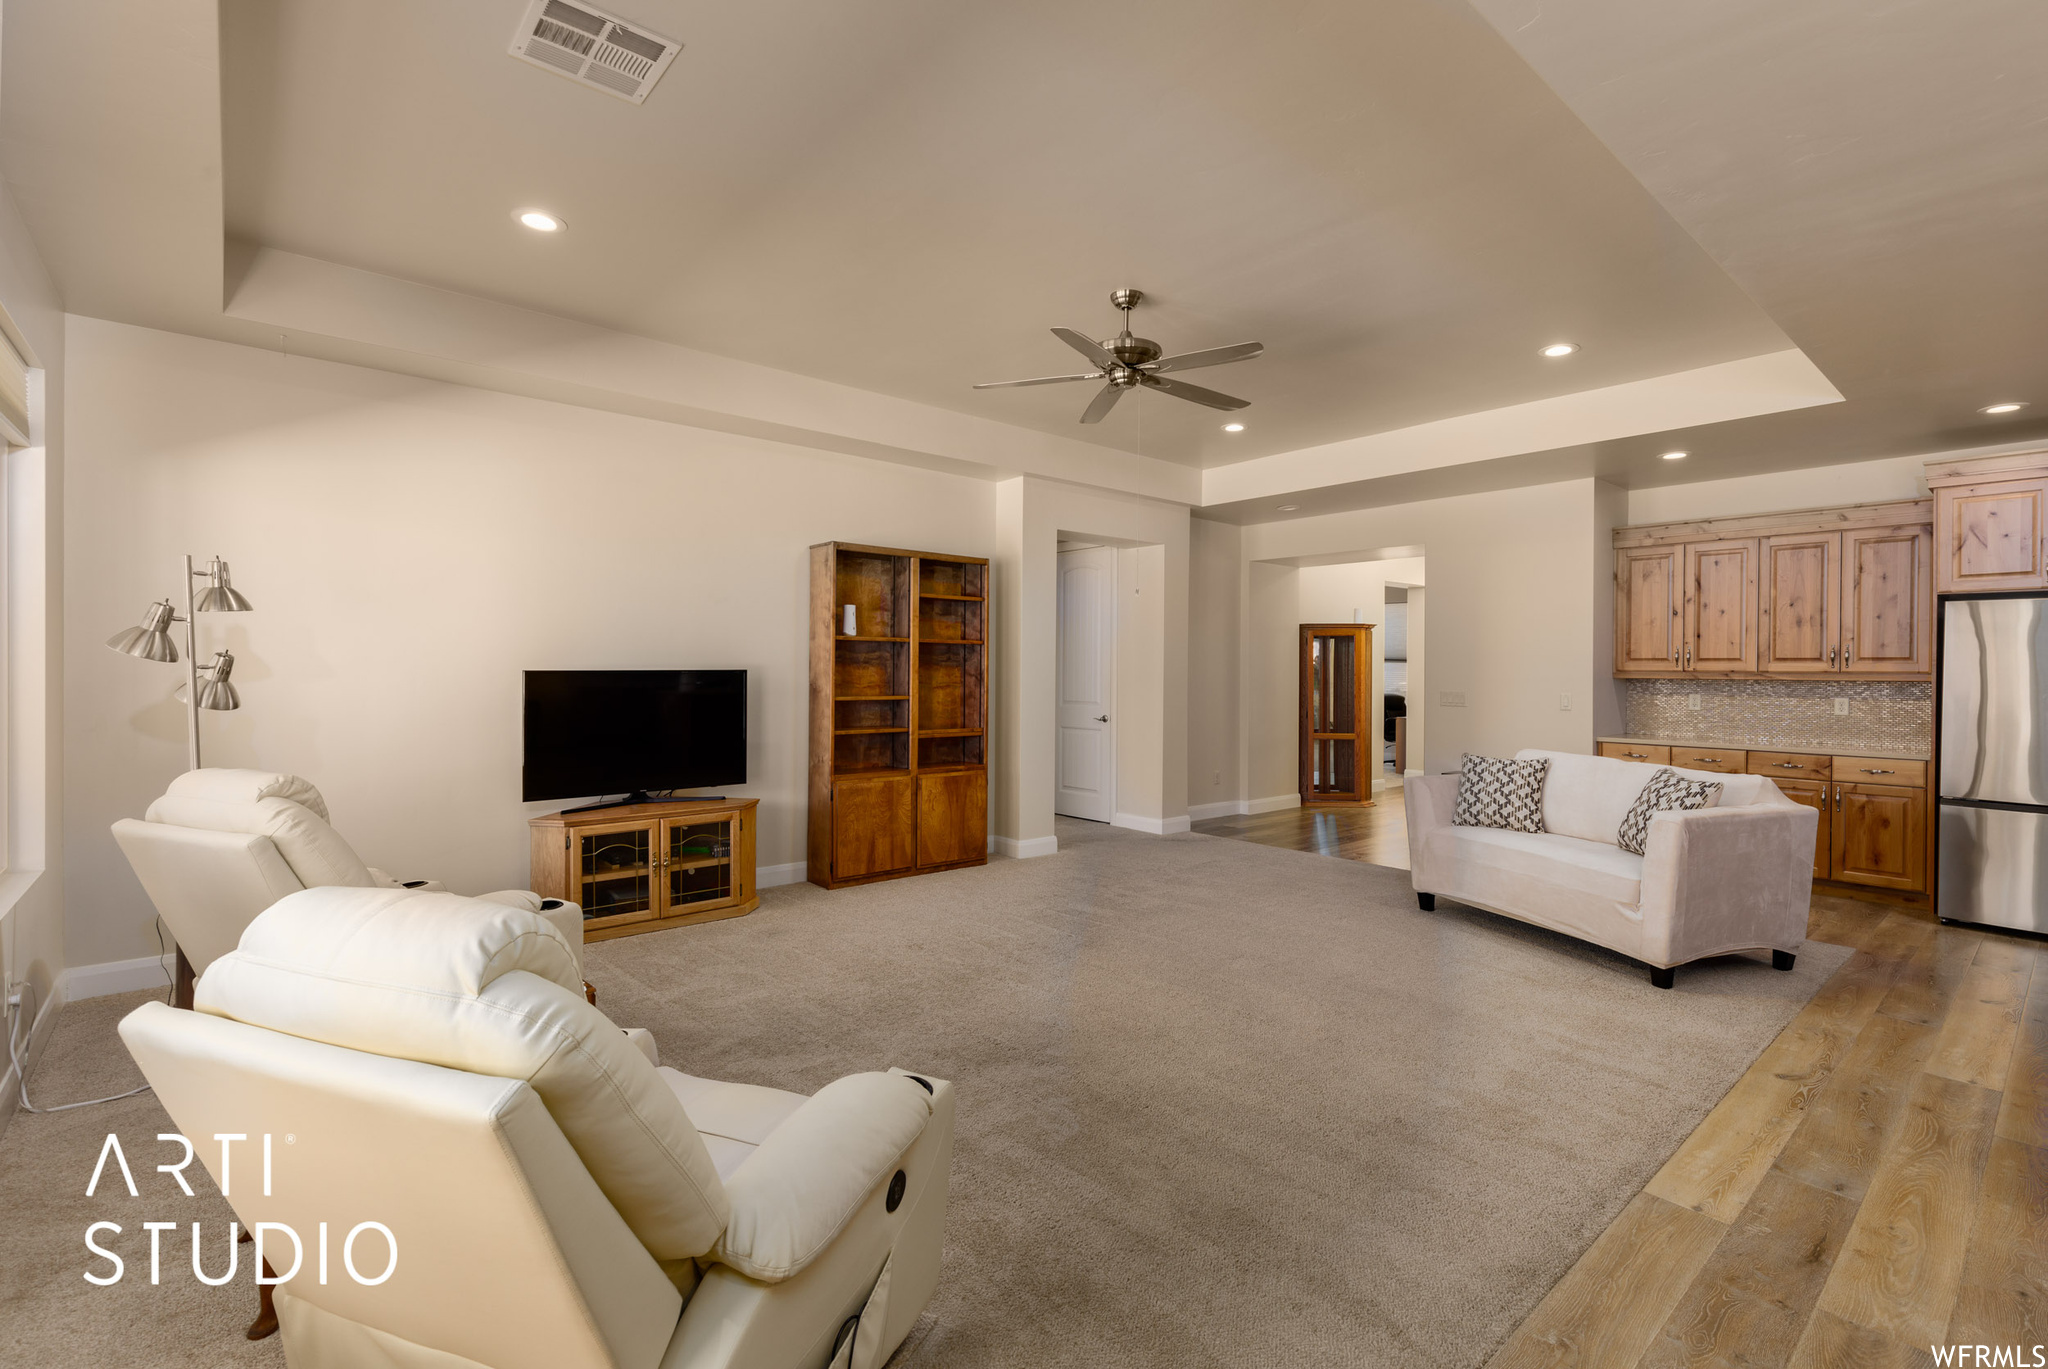 Living room with a raised ceiling, ceiling fan